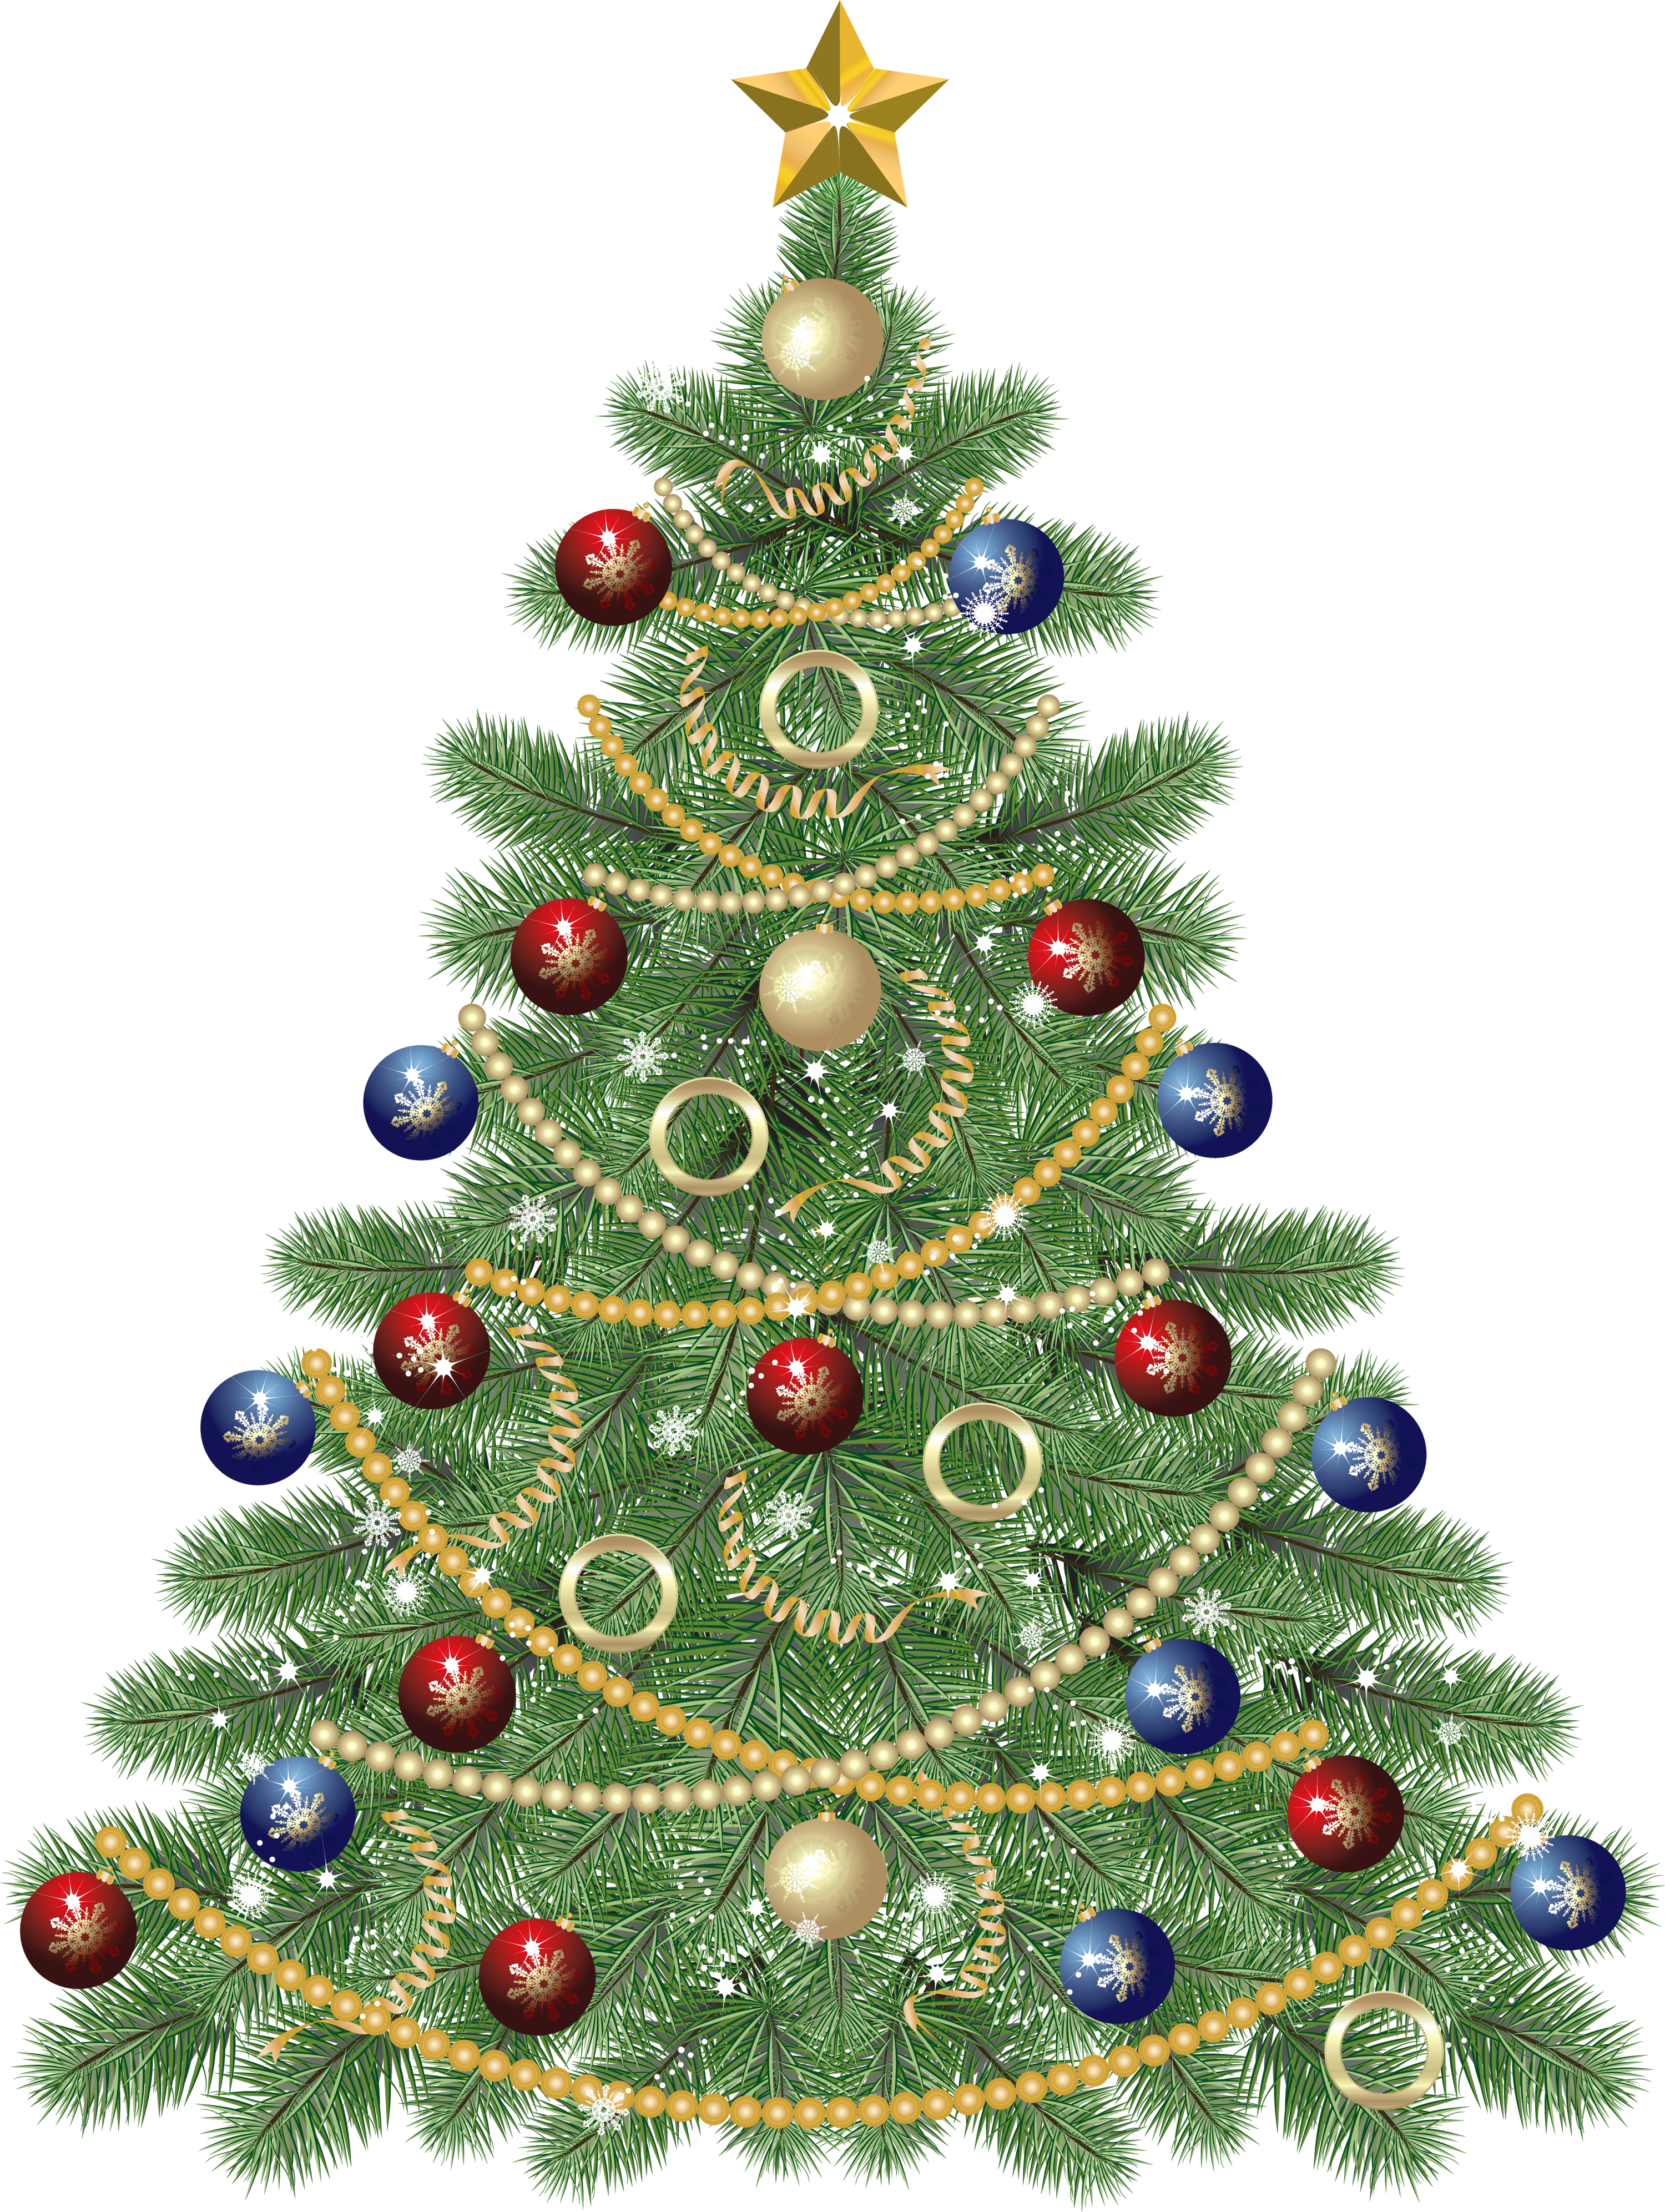 Free Clipart Images Of Christmas Trees.